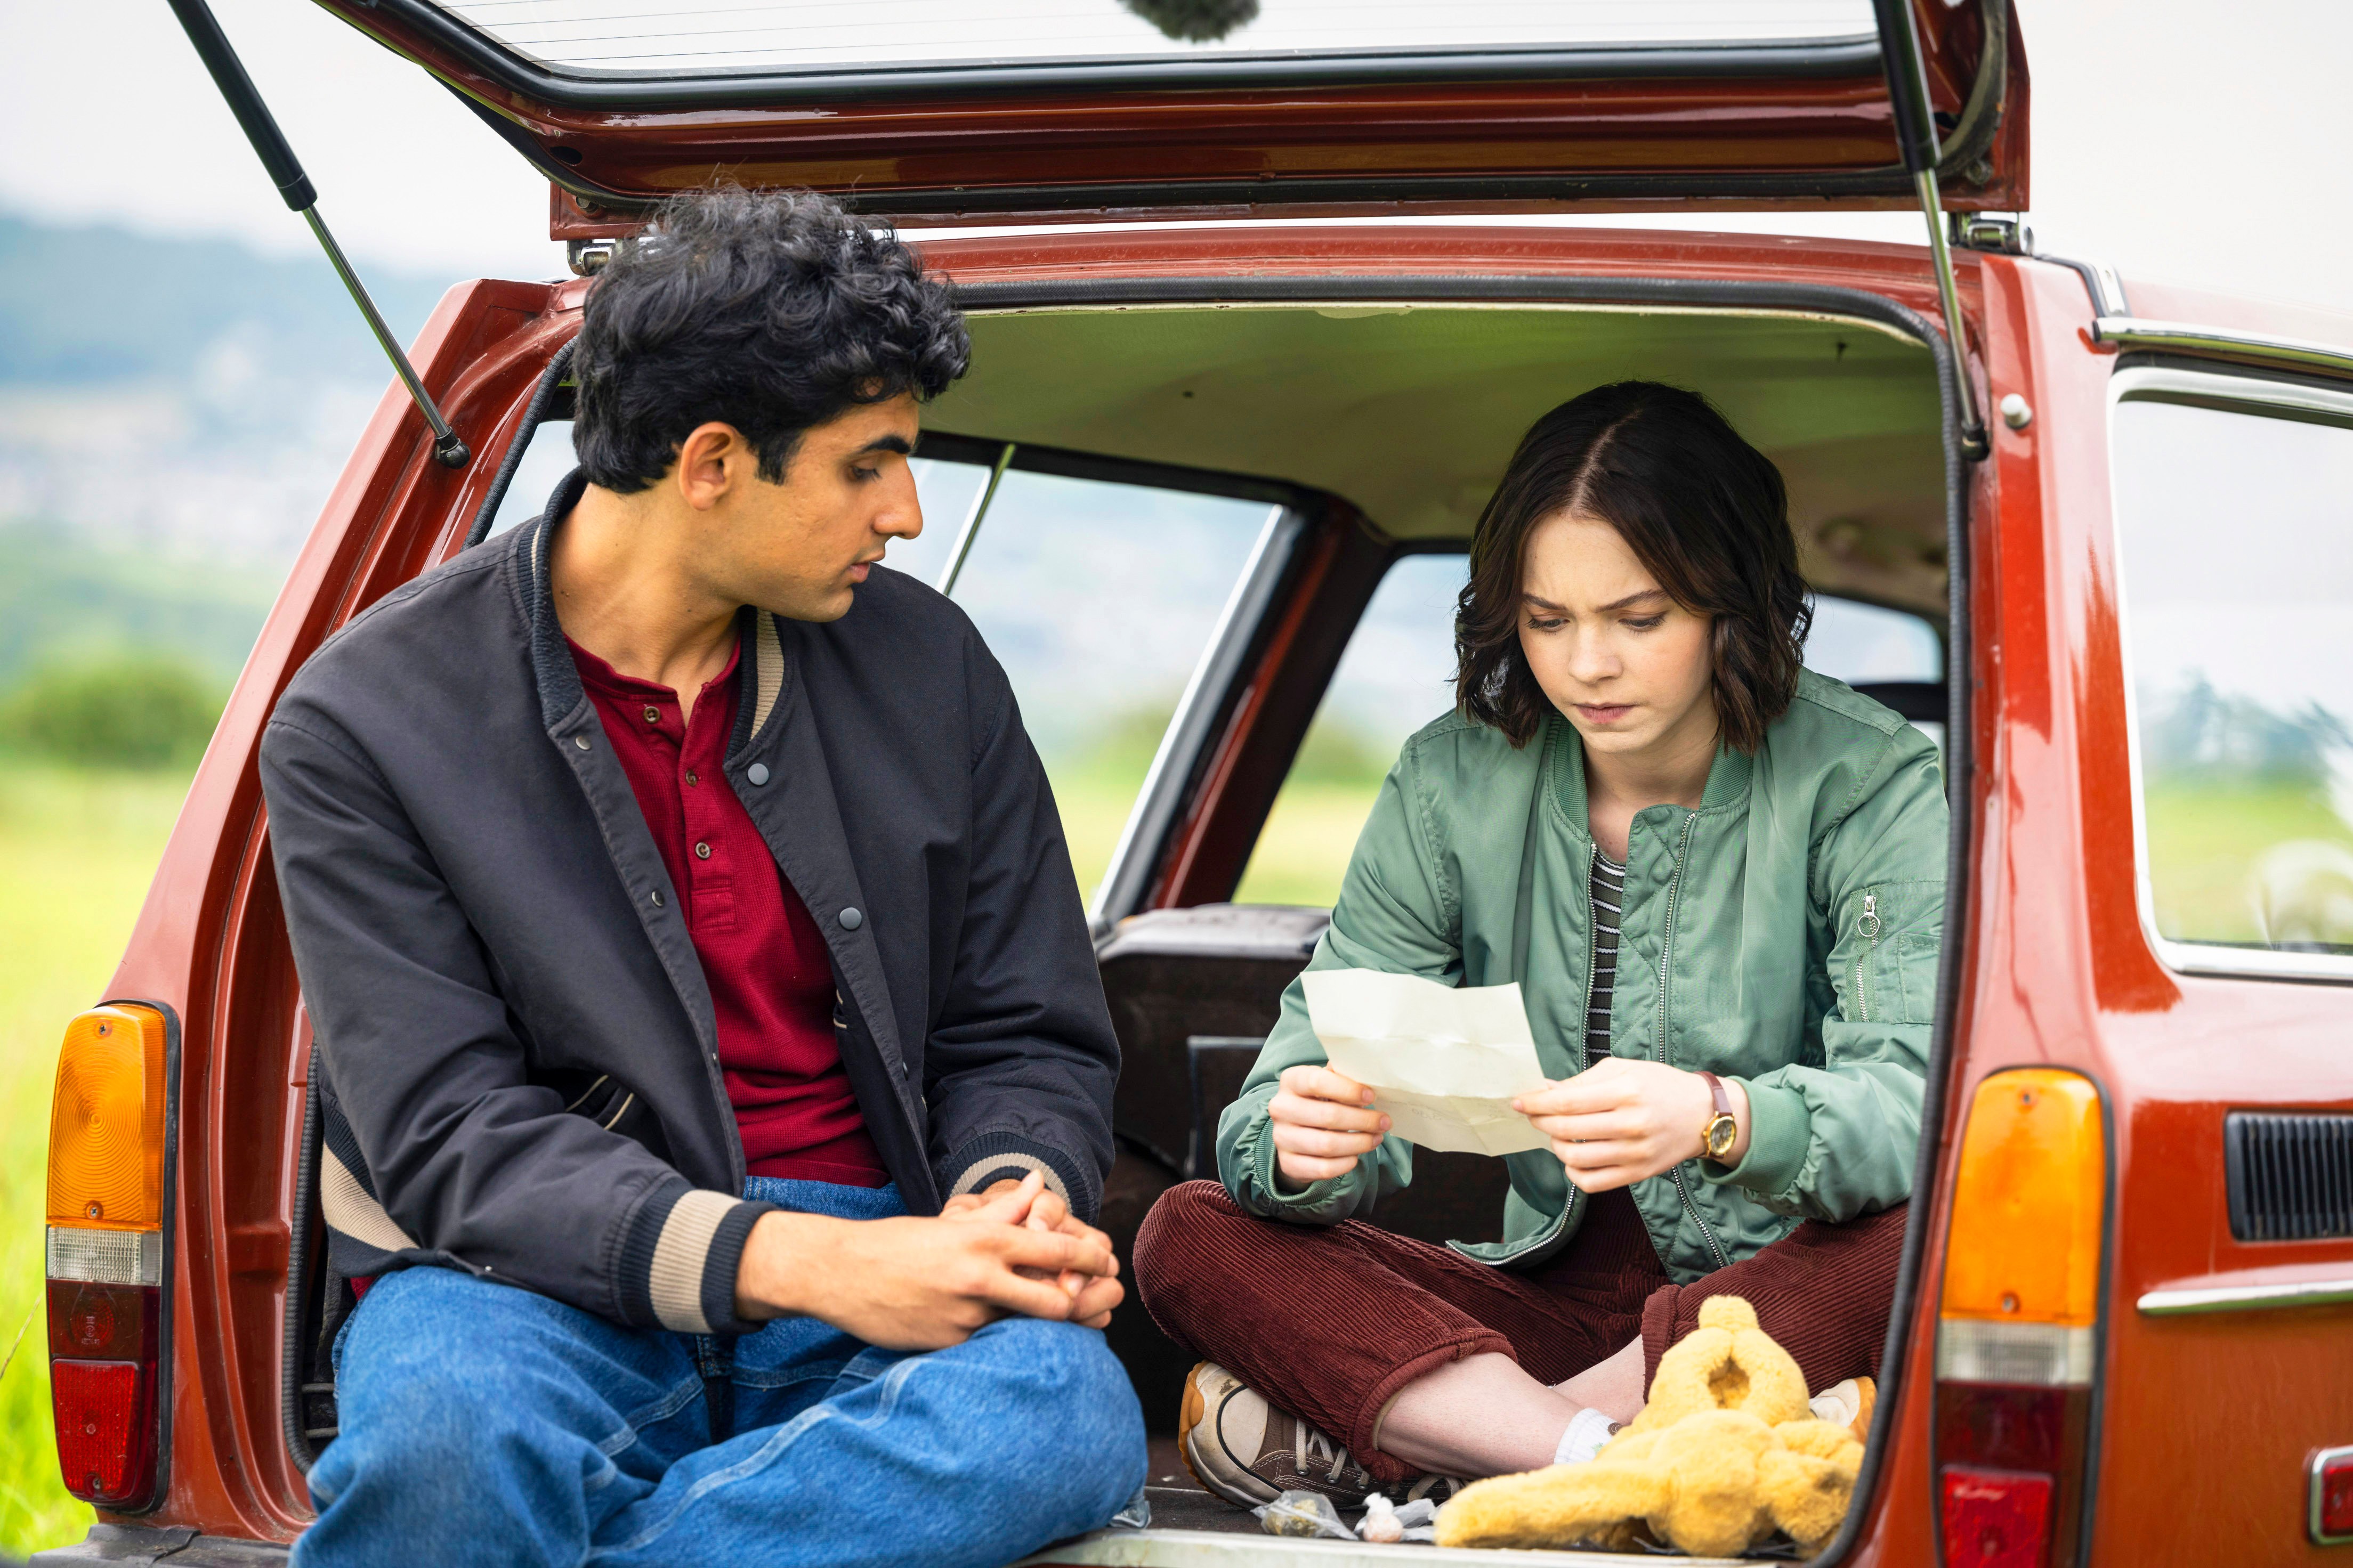 Ravi and Pip sat in the open boot of a car, looking at a piece of paper